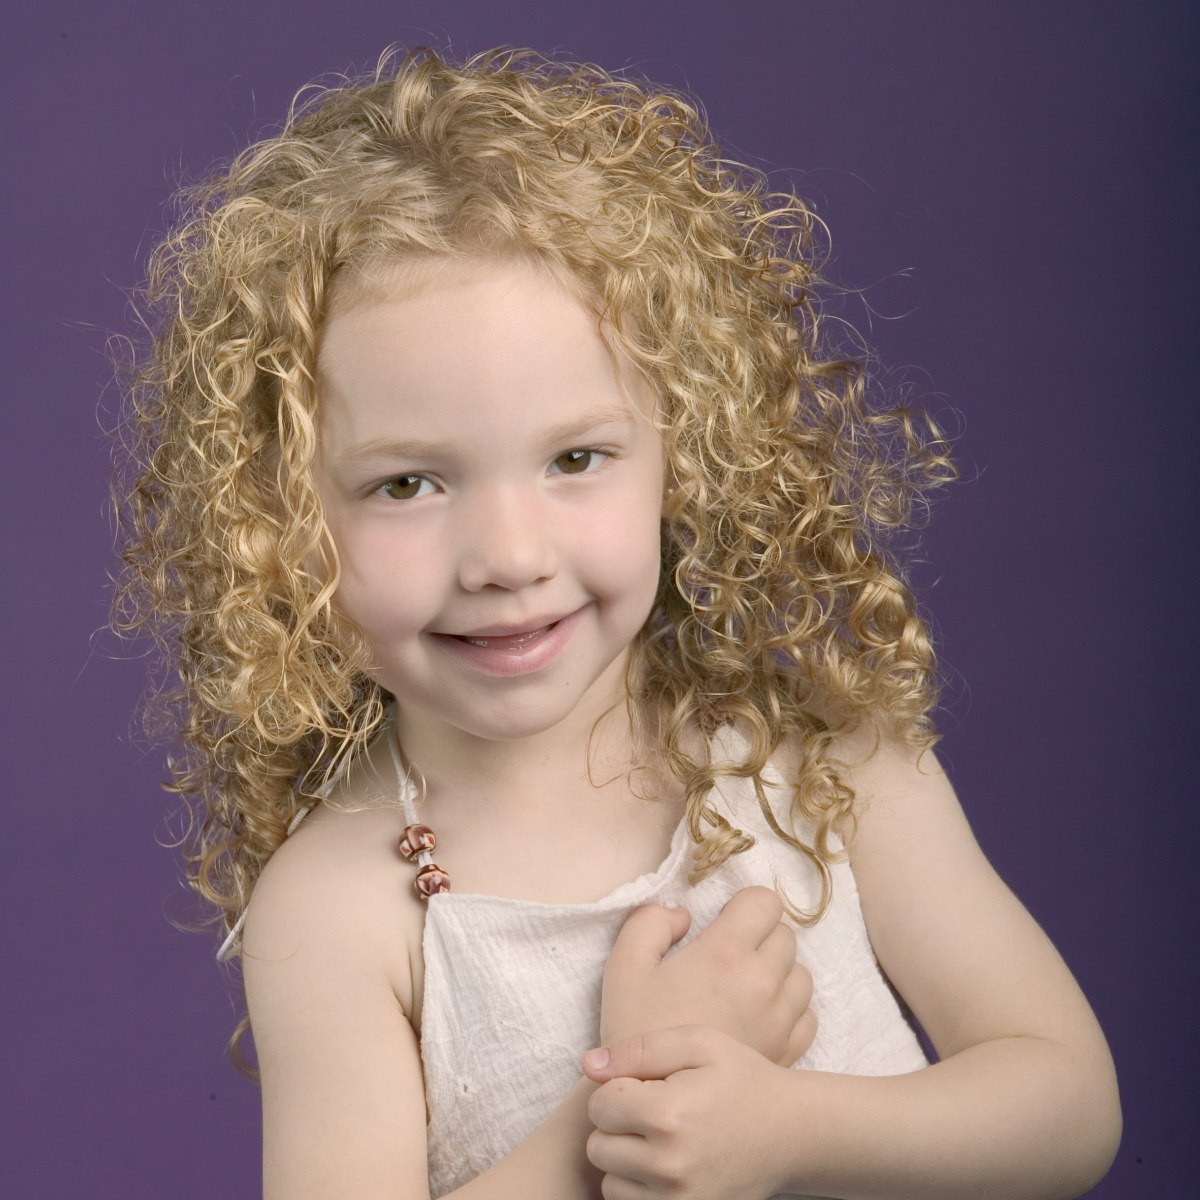 Hairstyle For Little Girl With Curly Hair
 Spiraling curls for a little girl